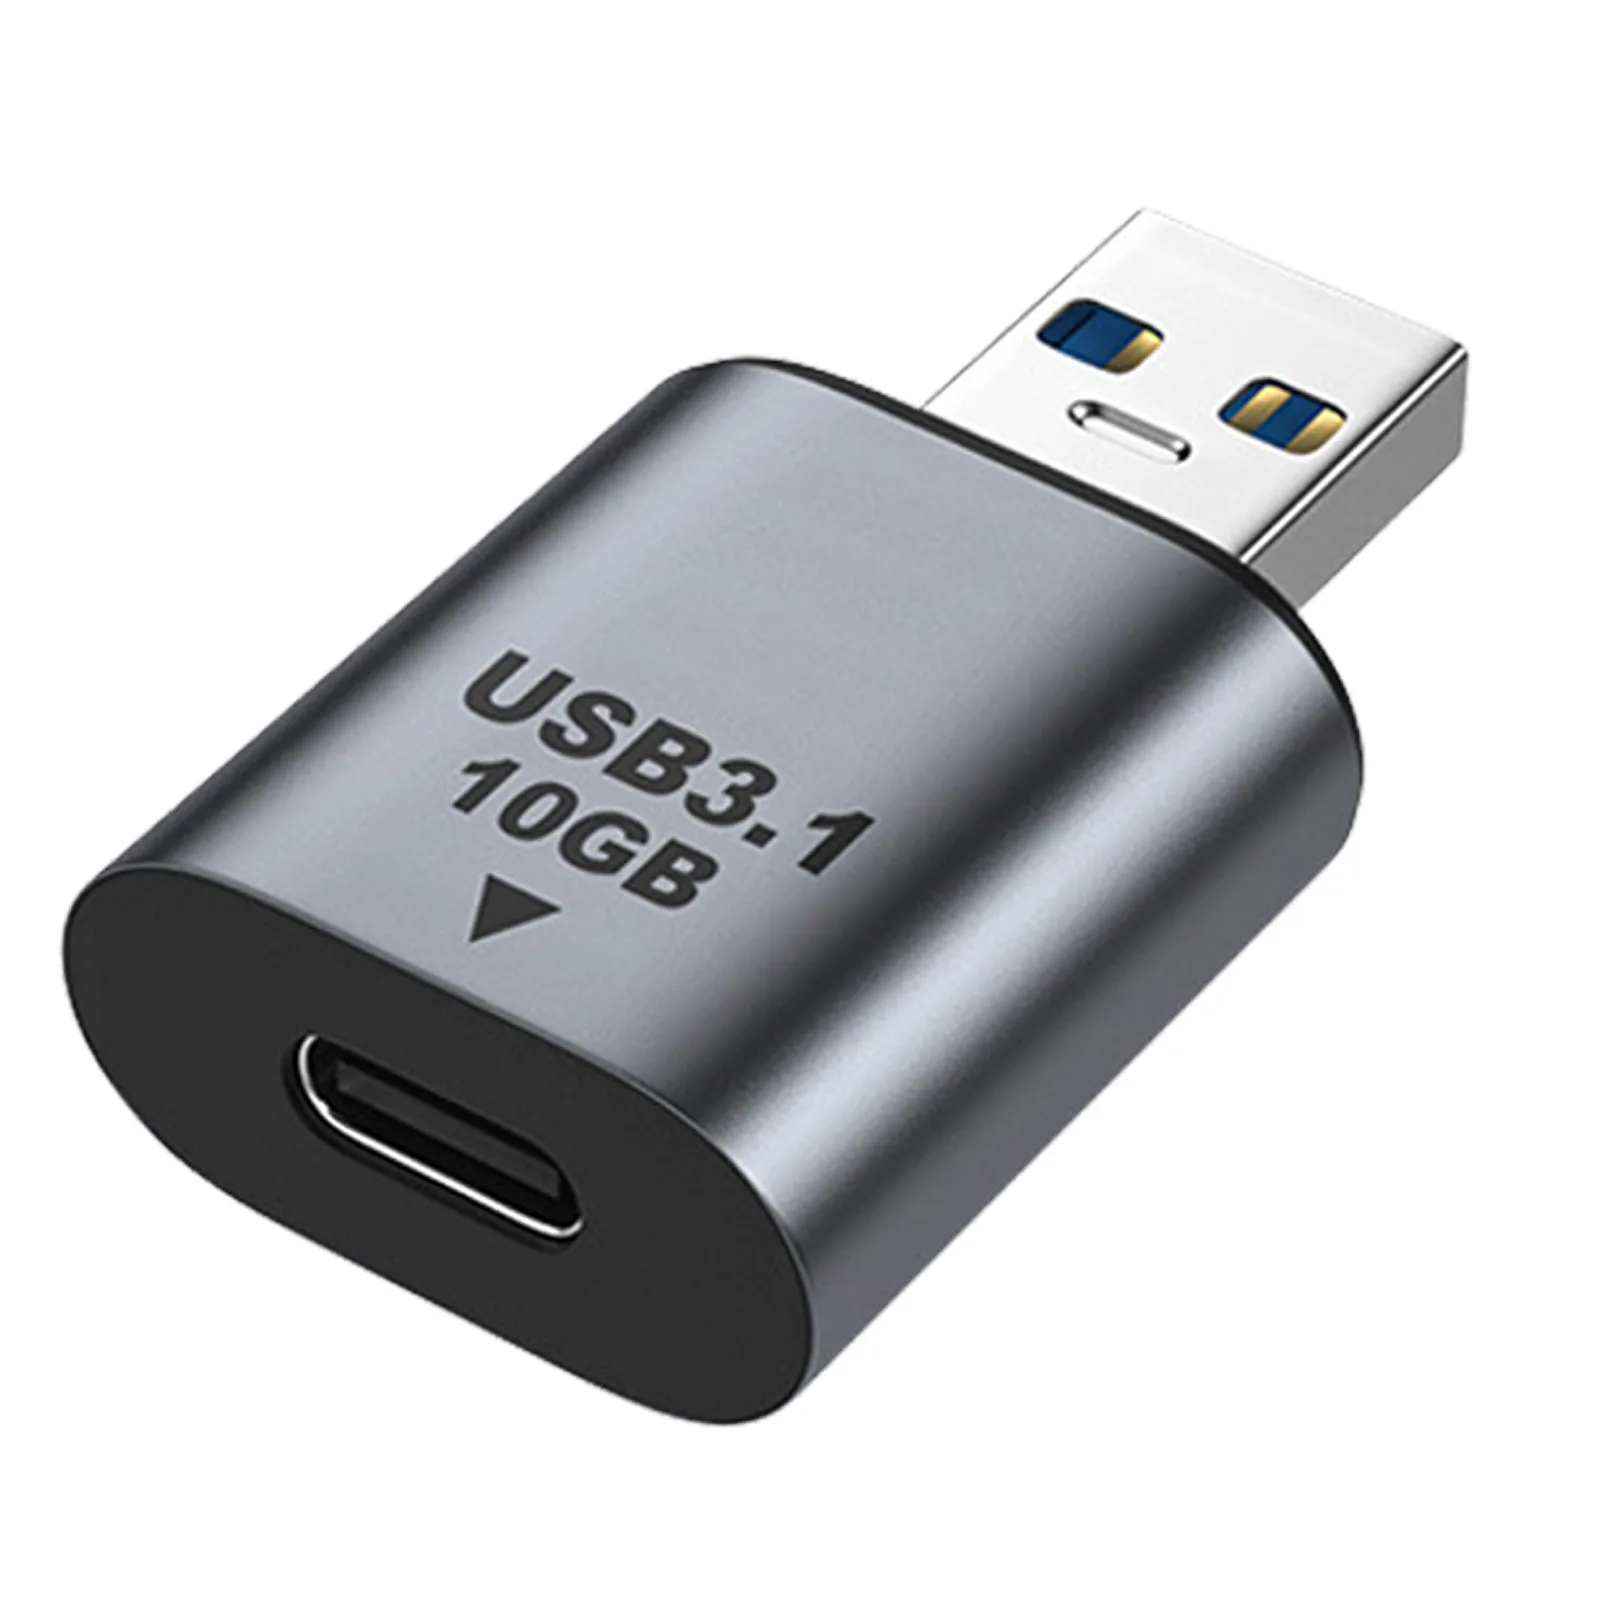 

USB3.1 To TYPE-C Adapter USB3.1 10gbps Converter With High-speed Transmission Gen 2 Converter Support Data Sync Transfer And